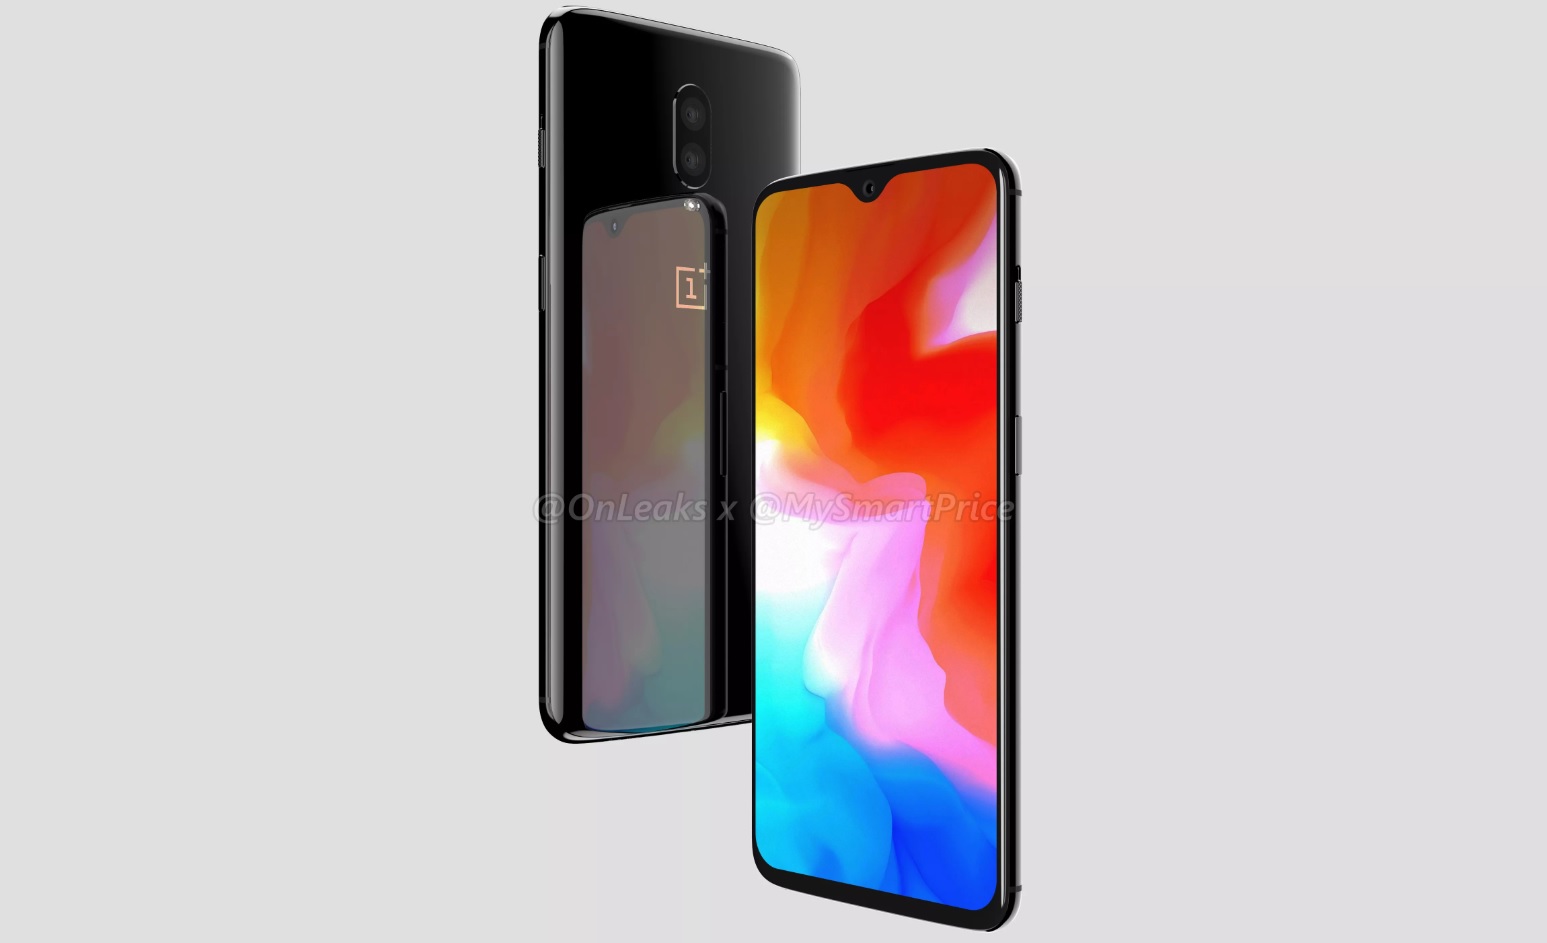 A leaked render of the OnePlus 6T.